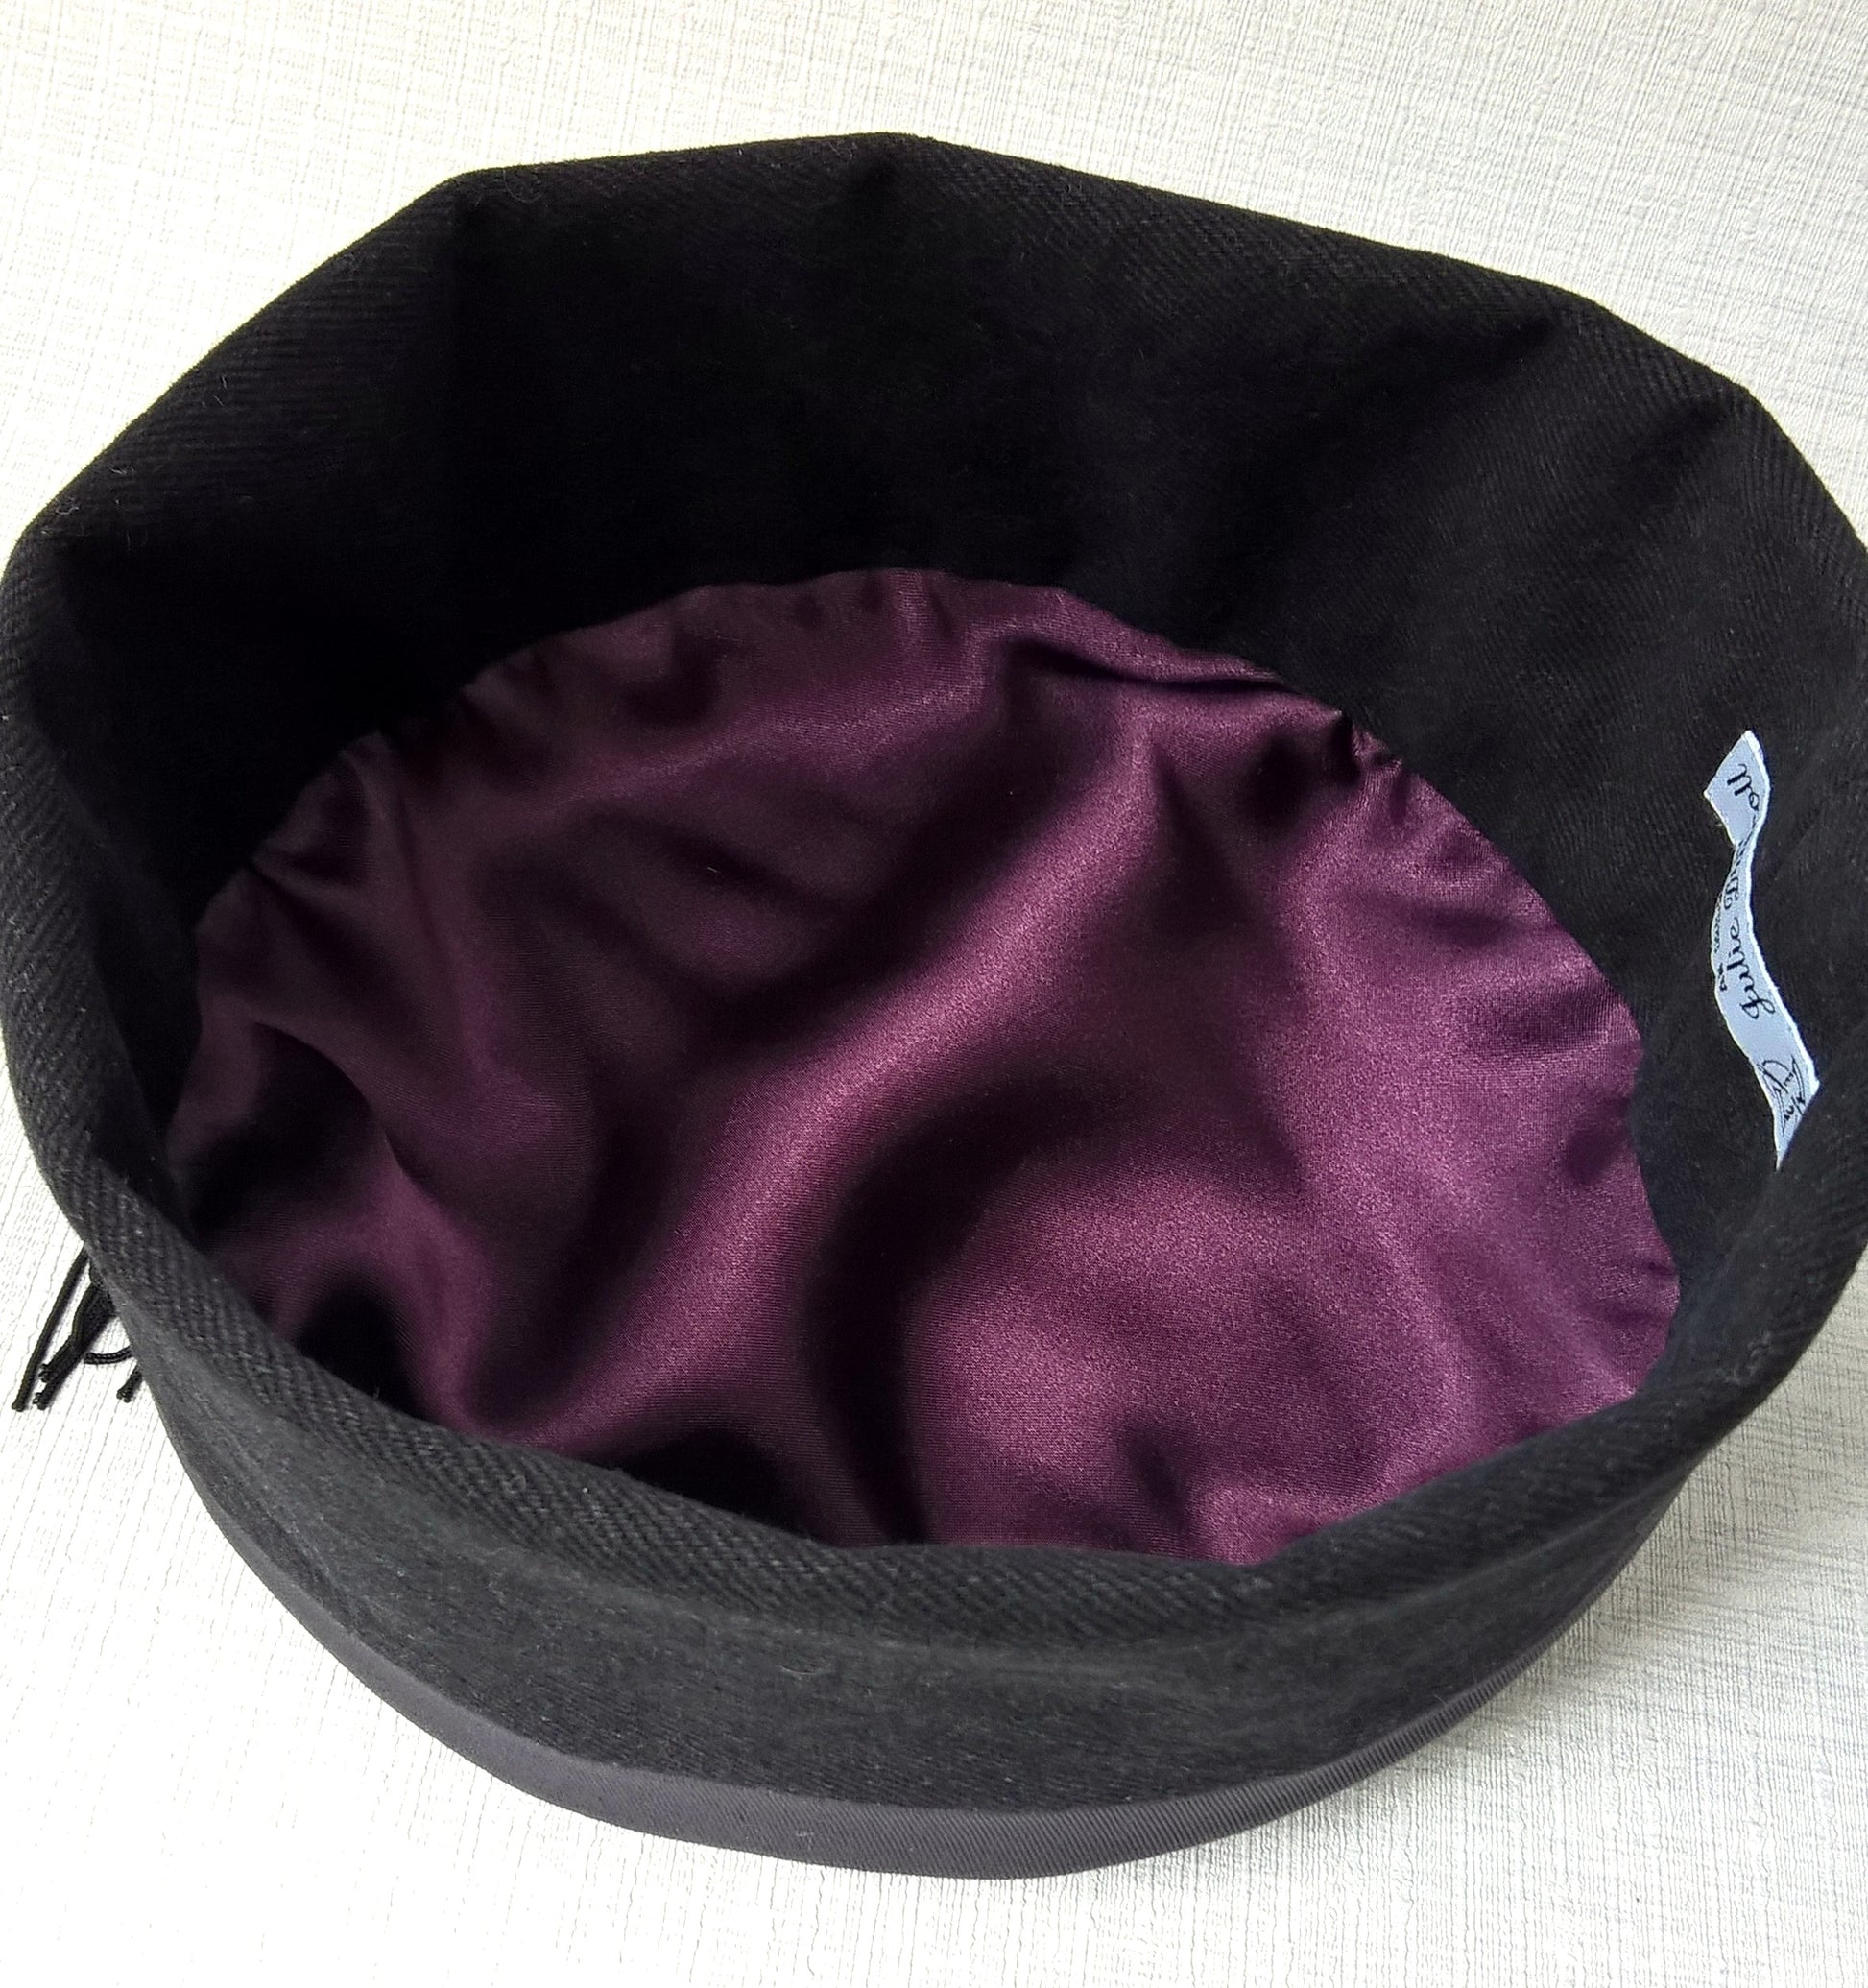 The interior of the smoking cap is hand-finished with an aubergine satin lining